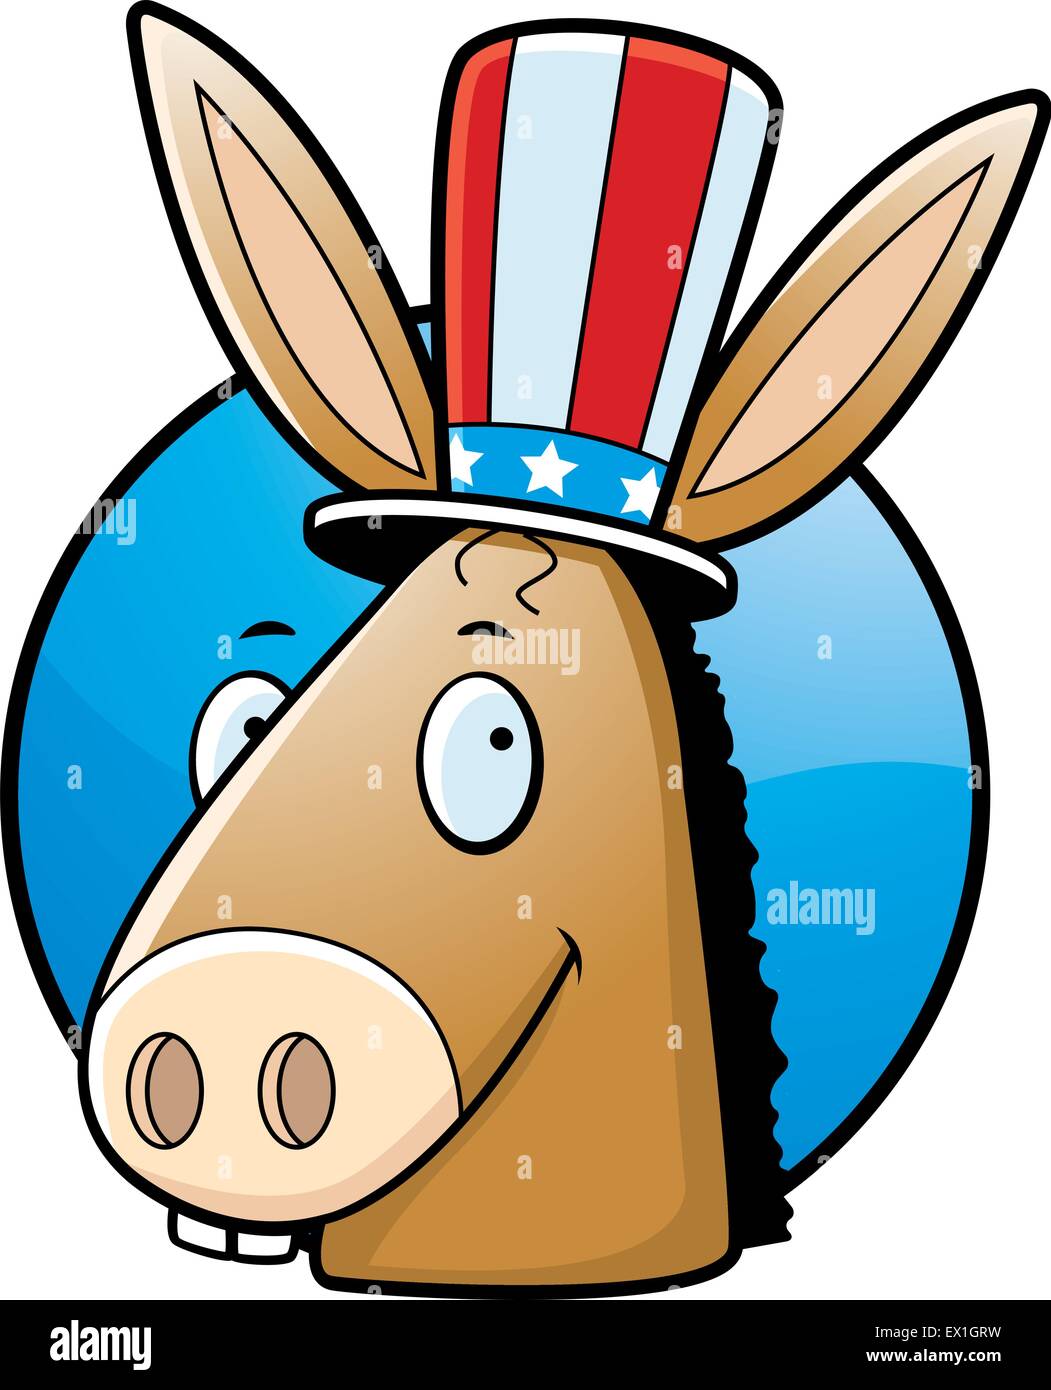 A cartoon icon with a democratic donkey smiling. Stock Vector